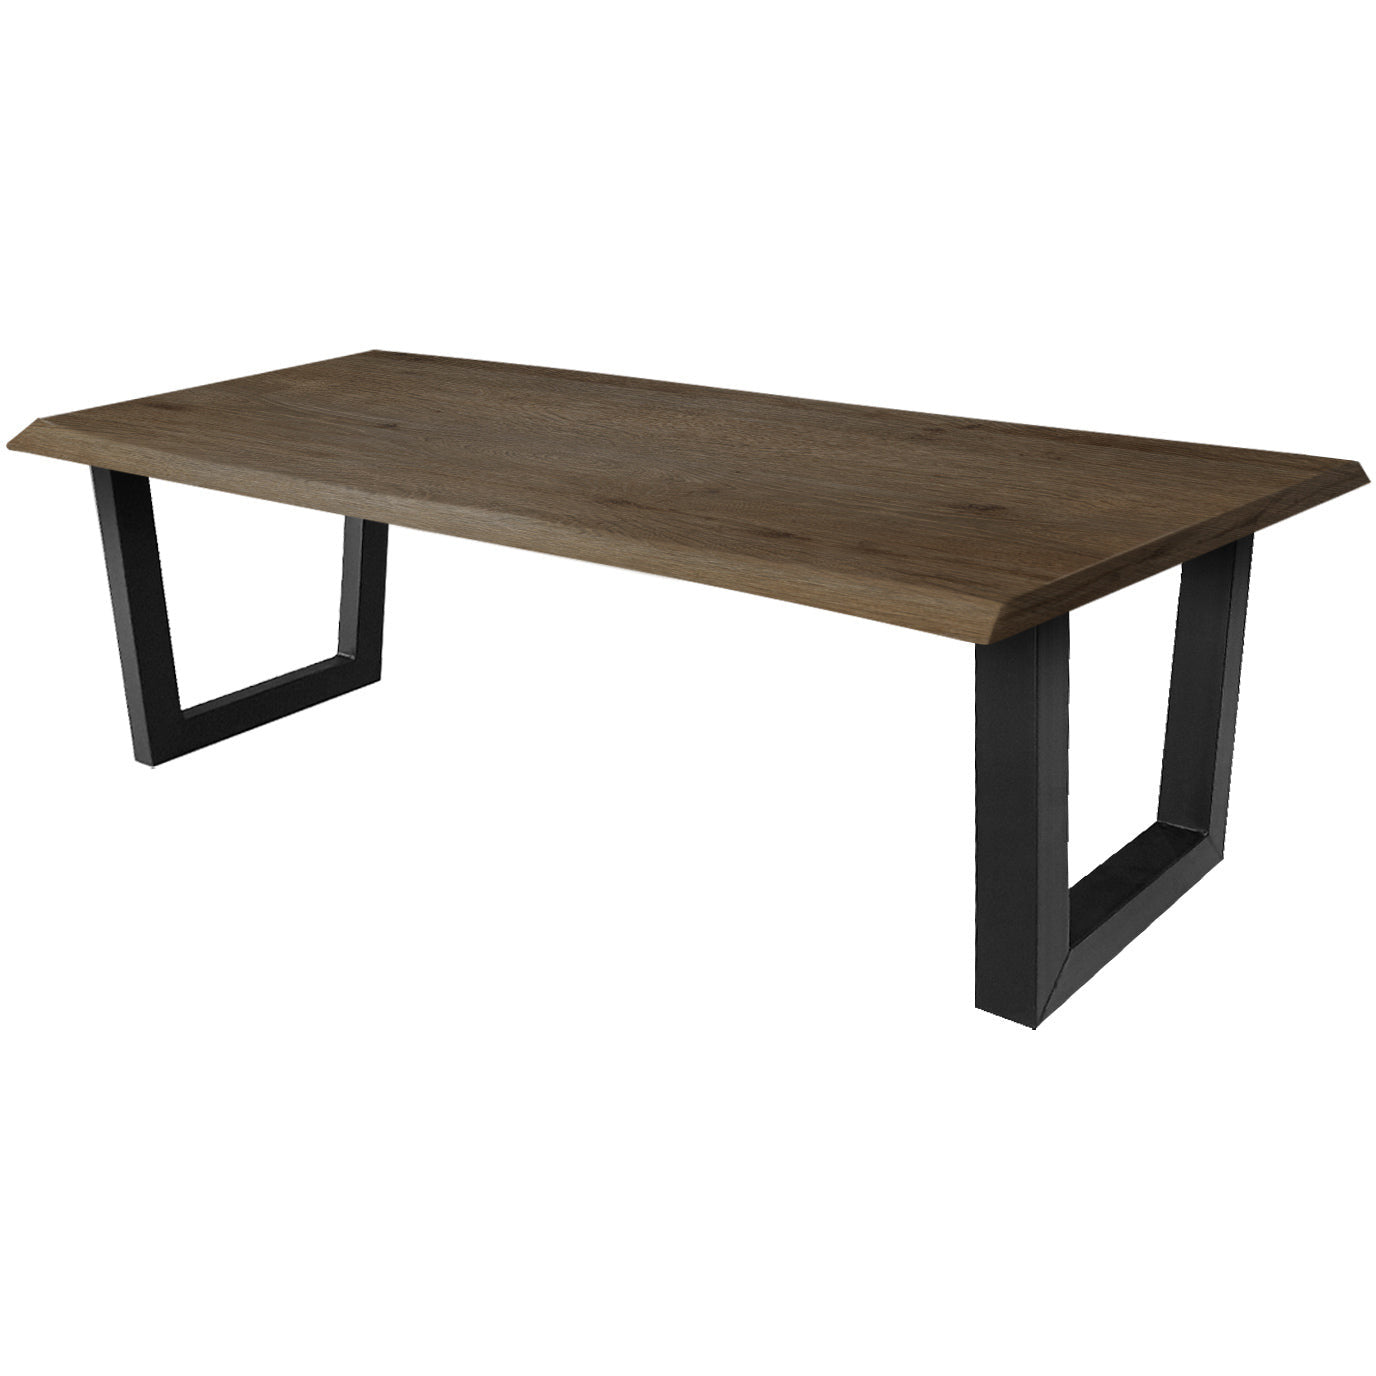 Dining table | Rectangle | Smoked | Oak wood | Lacquered | U-leg